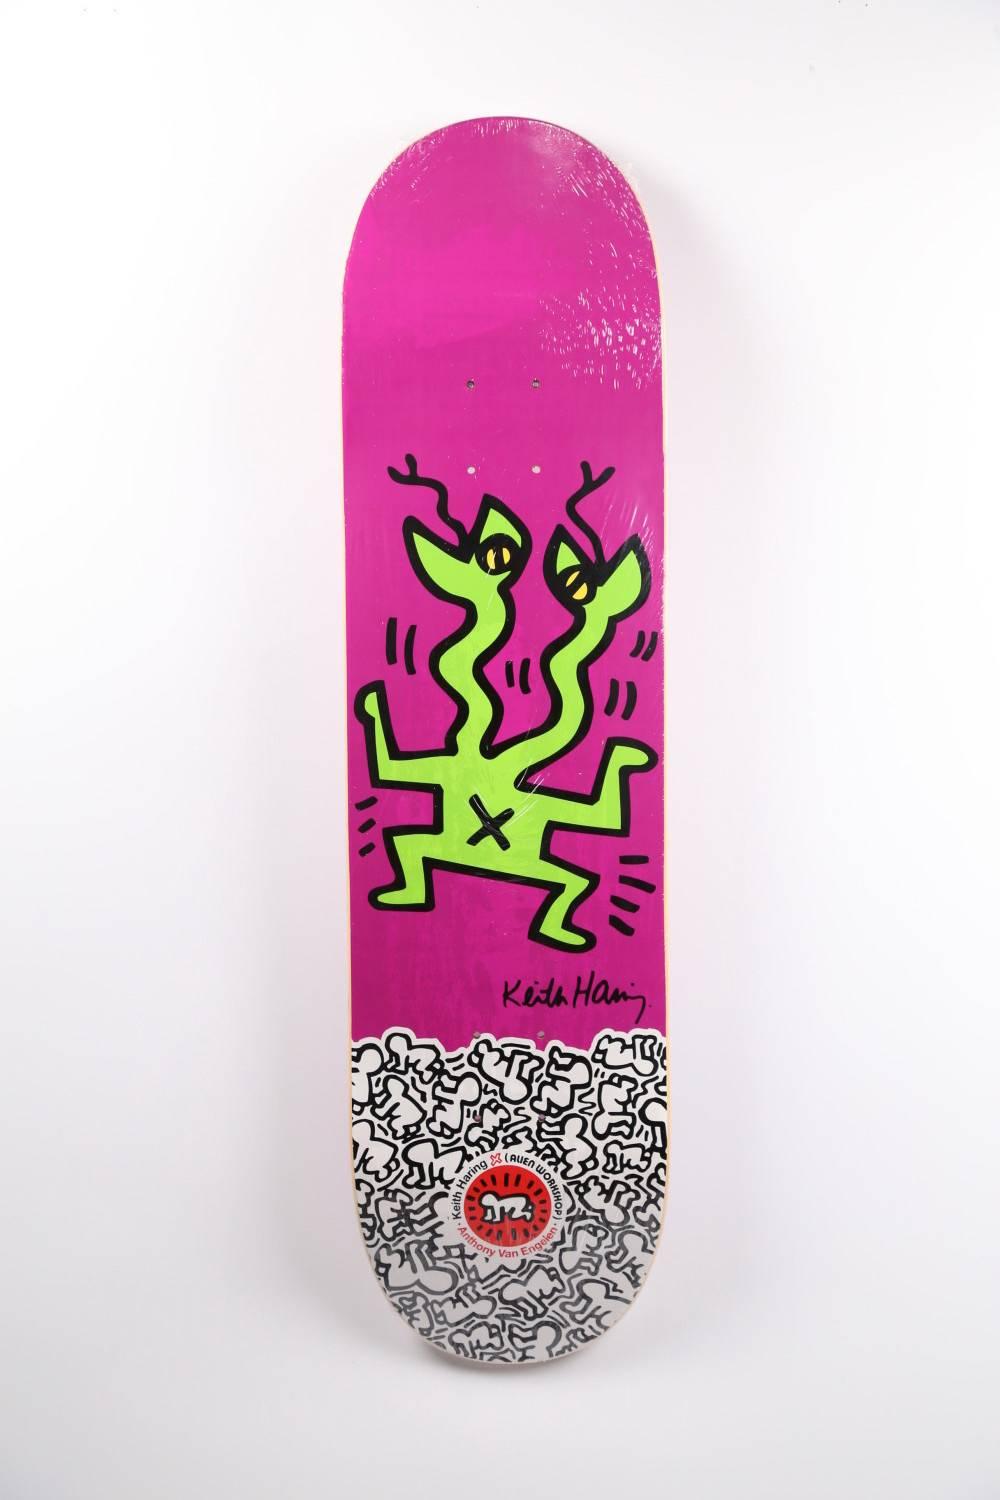 Keith Haring Skateboard Deck (New)
Extremely rare, out of print Keith Haring skate deck featuring one of the Haring's iconic lizard image, set amidst a brilliant array of colors. This work originated circa 2012 as a result of the collaboration